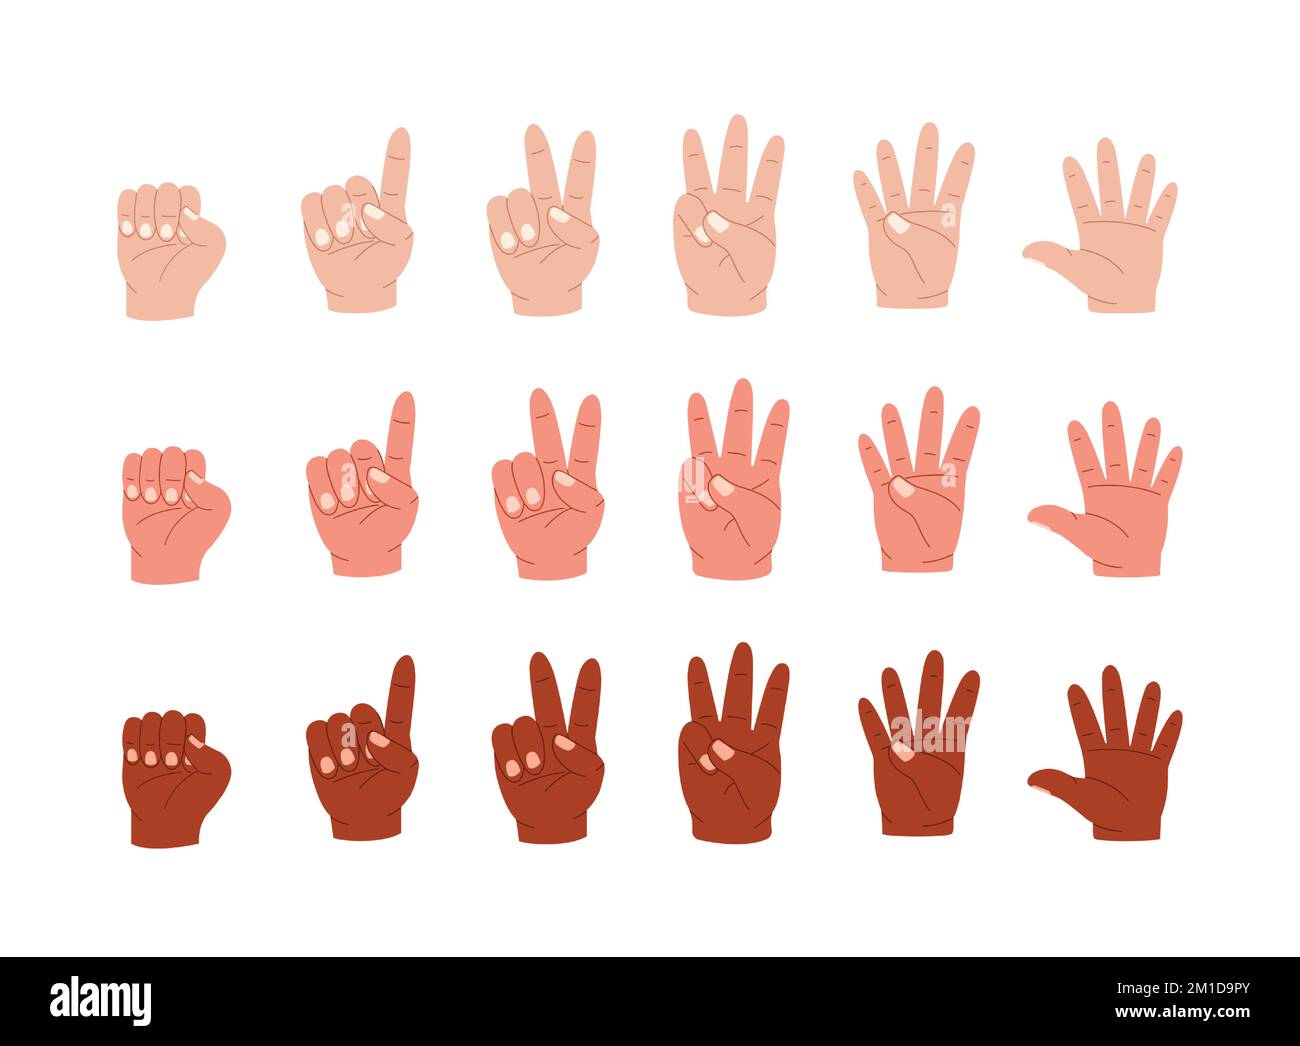 Hands count. Cartoon multiracial human palm gestures showing numbers by fingers, math study sign language concept flat style, Vector isolated set Stock Vector